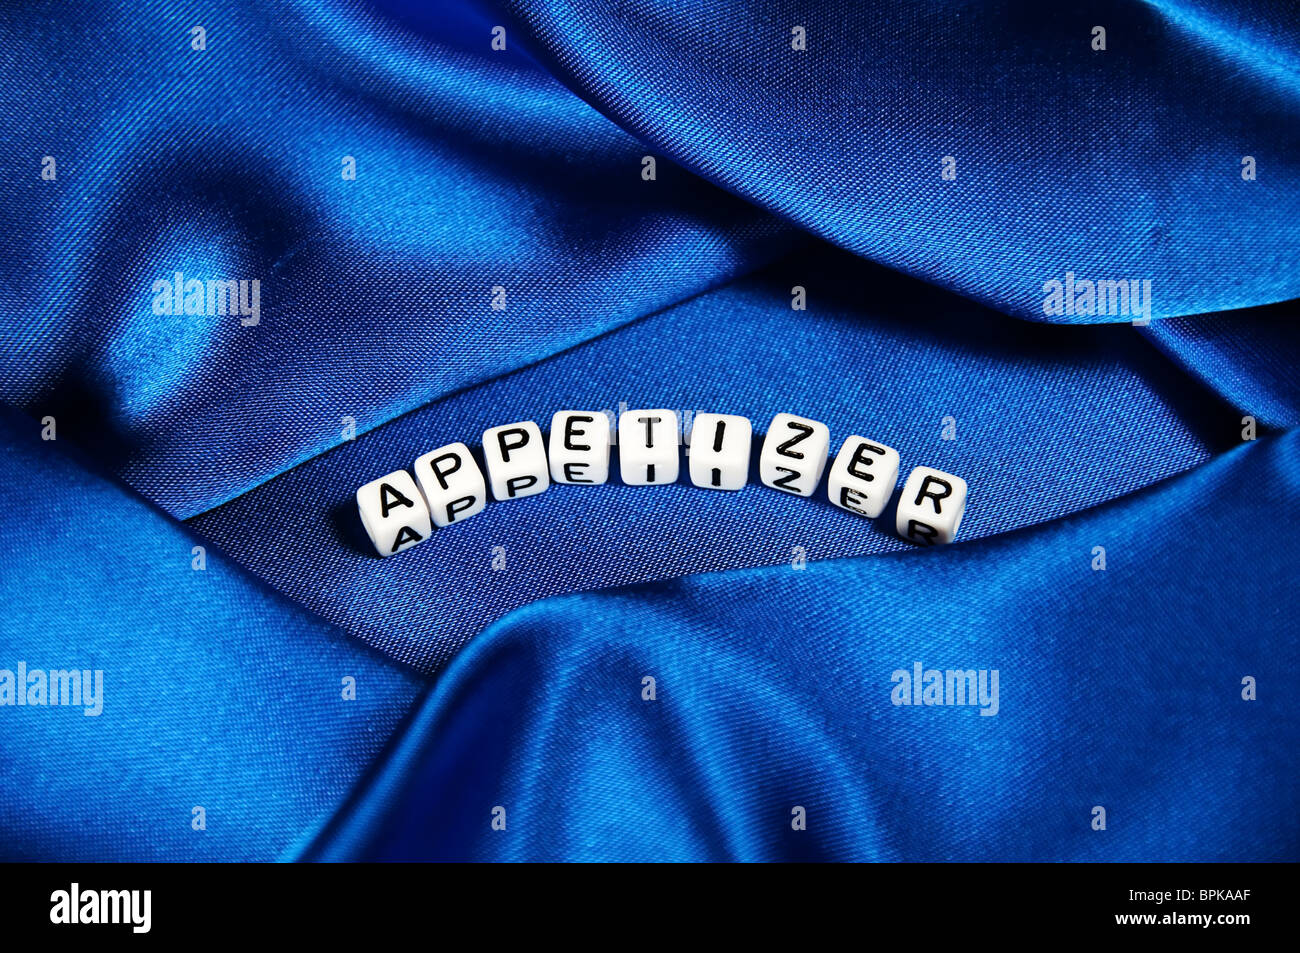 This series has a deep royal blue satin shiny background with the word Appetizer in black and white cube lettering. Stock Photo